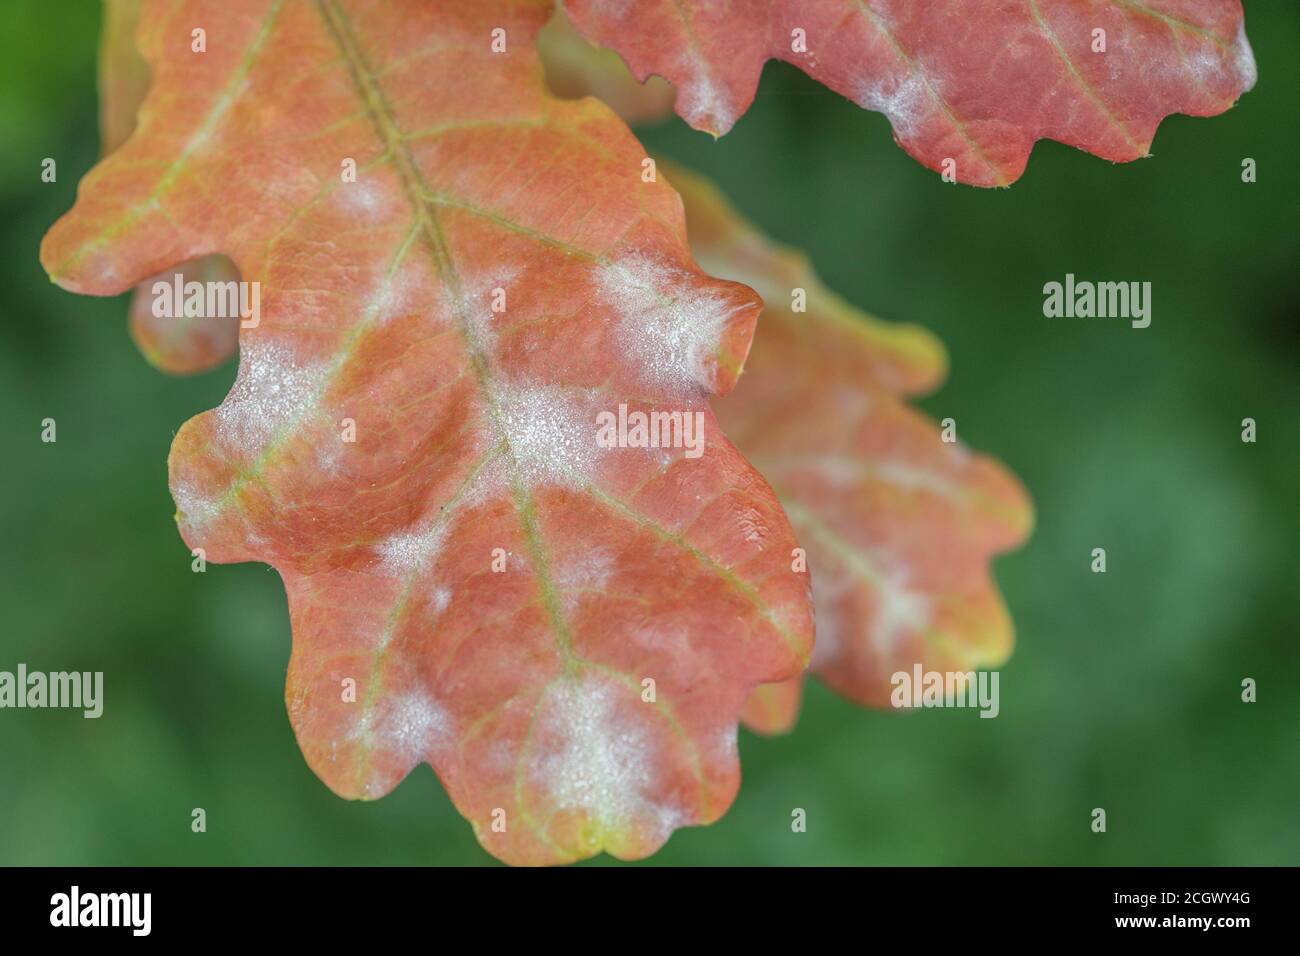 Close-up shot of Oak leaves covered with a powdery mildew, perhaps caused by fungus Erysiphe alphitoides / Microsphaera alphitoides. Plant disease. Stock Photo